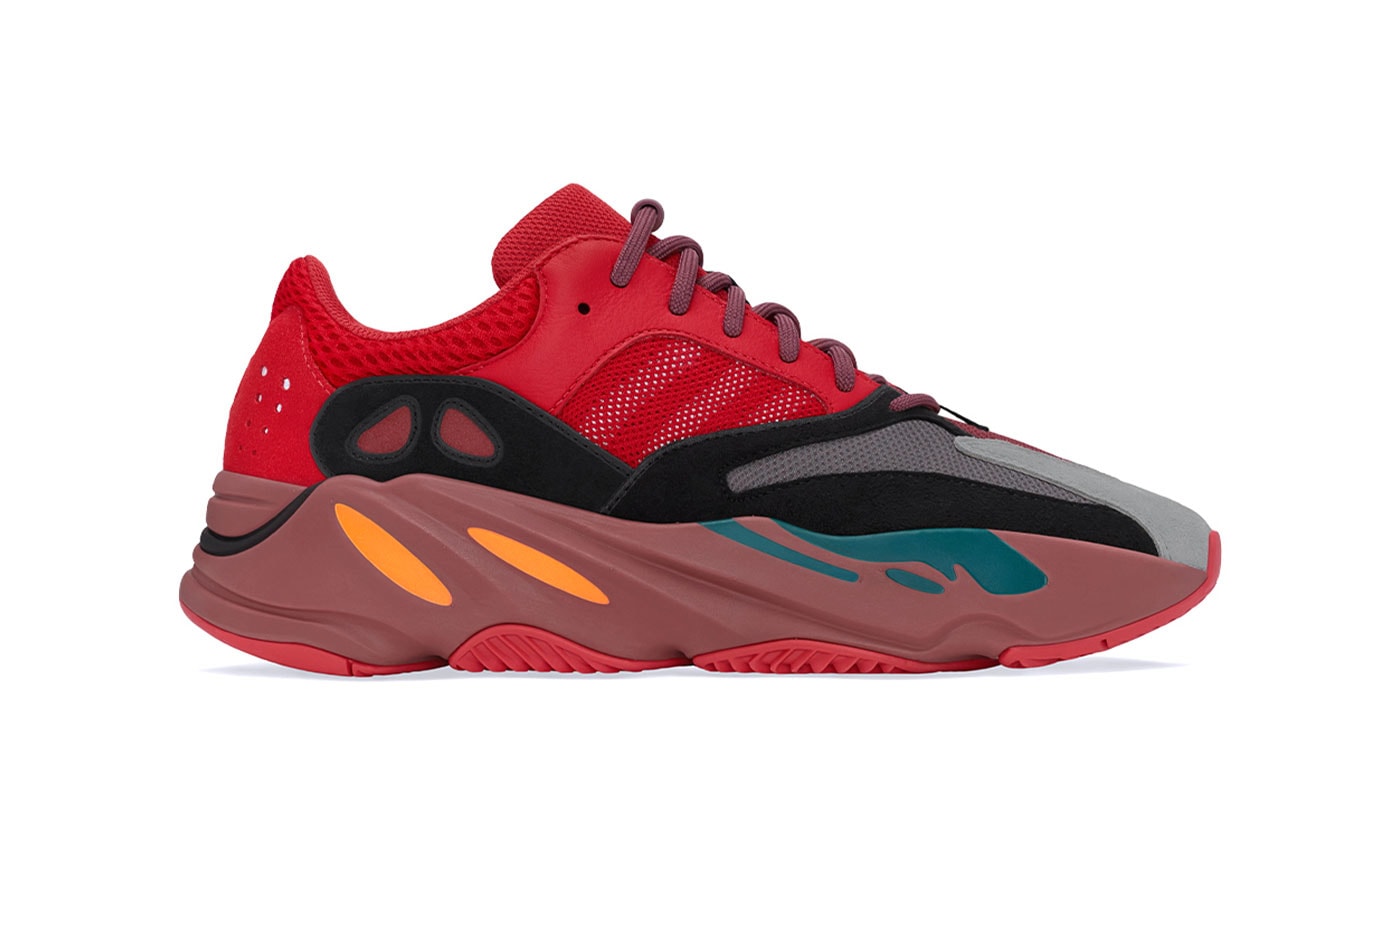 adidas YEEZY Boost 700 High-Res Red 350 V2 Bone 500 Ash Grey HBX Release Info Buy Price